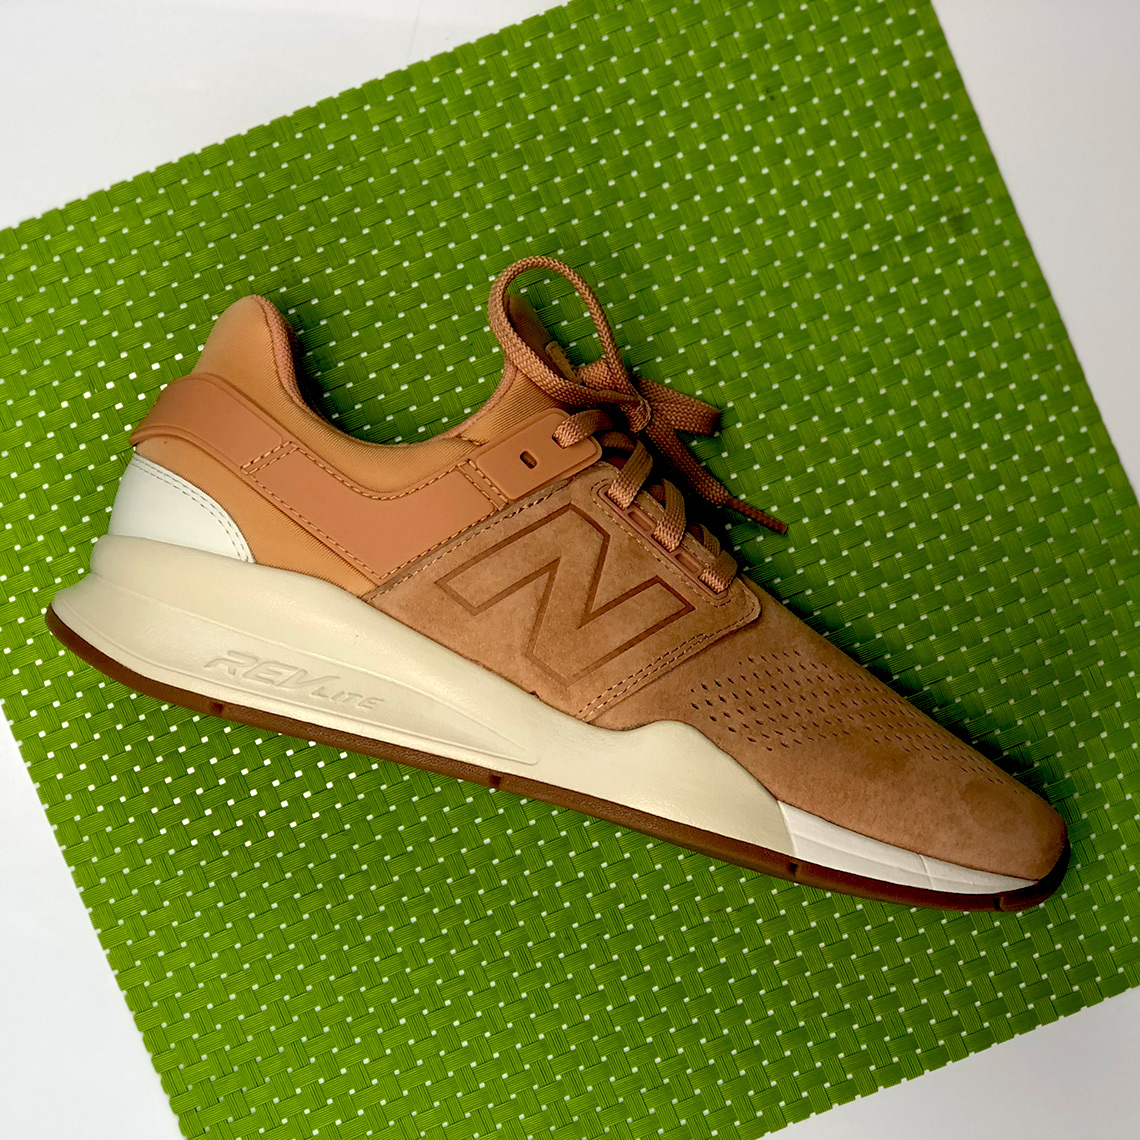 New Balance 247 V2 Suede Leather Tonal Pack 3